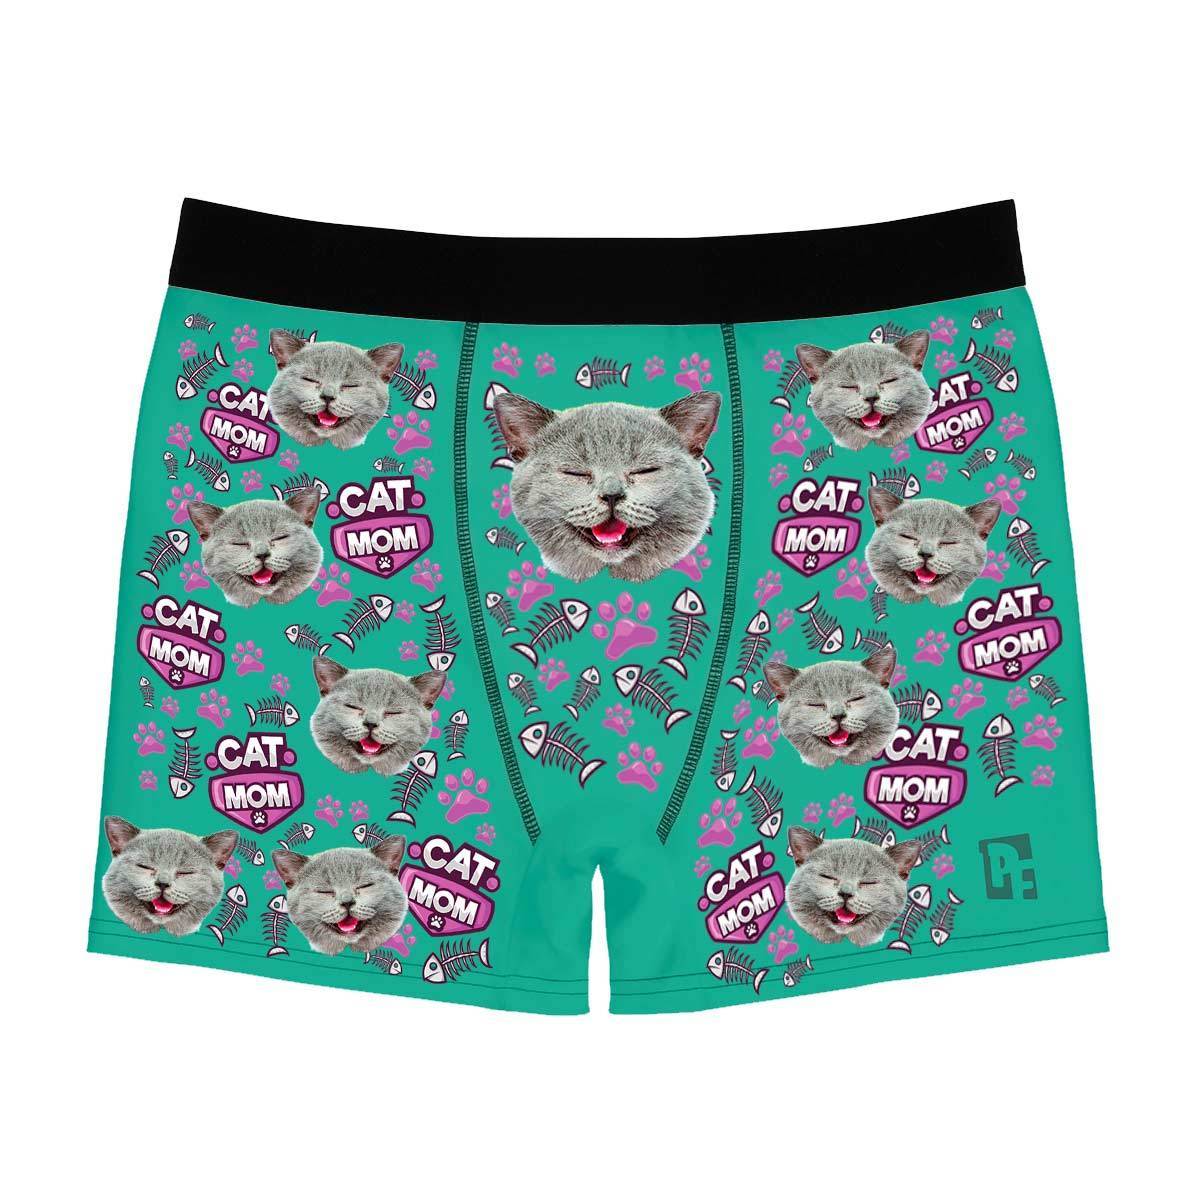 Mint Cat Mom men's boxer briefs personalized with photo printed on them